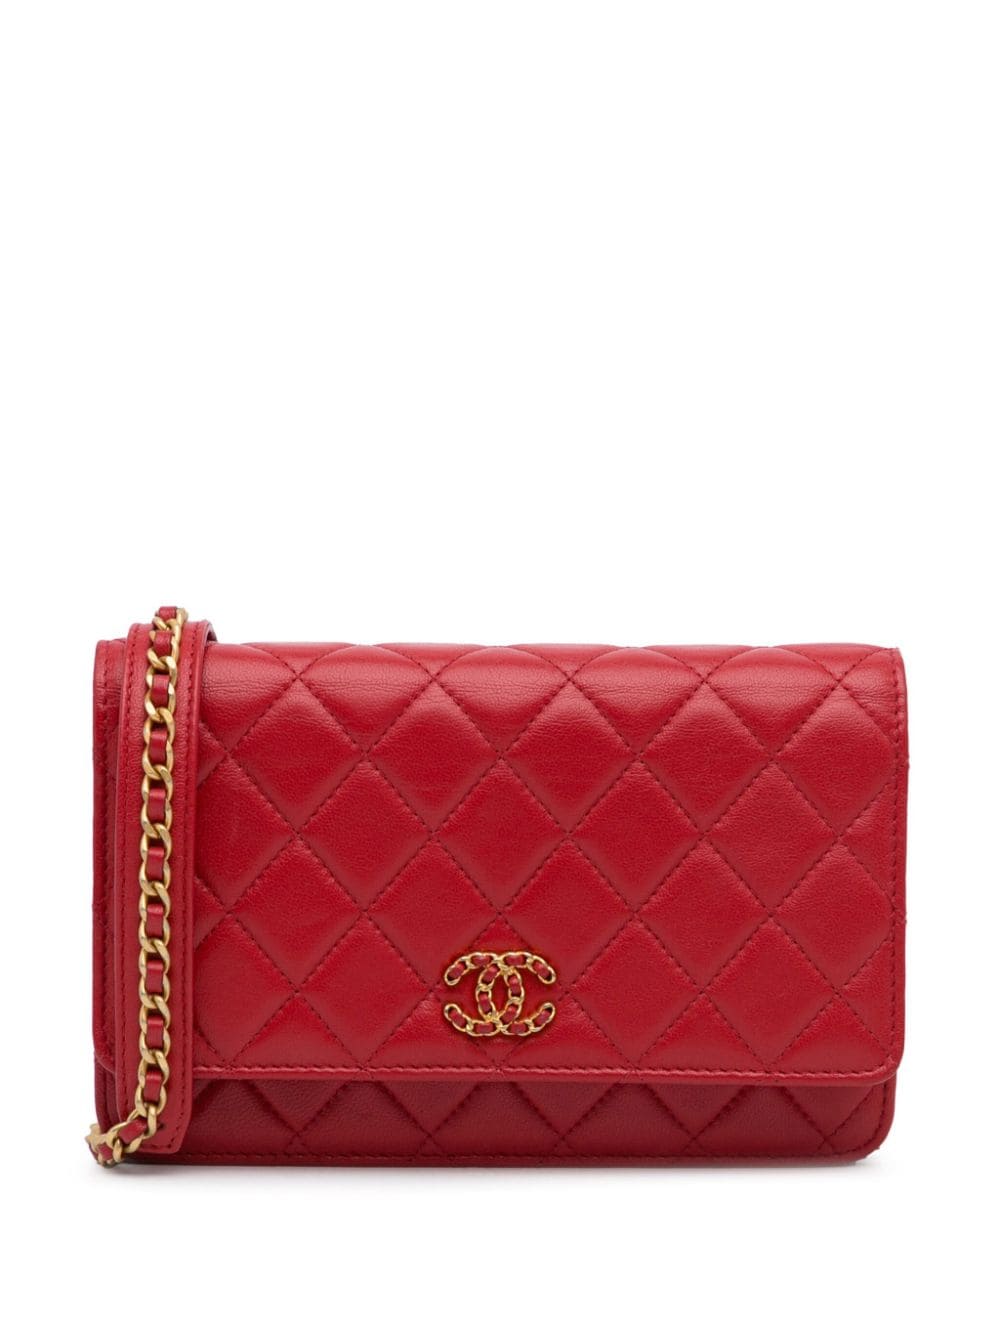 Pre-owned Chanel 绗缝搭链钱包（2019年典藏款） In Red